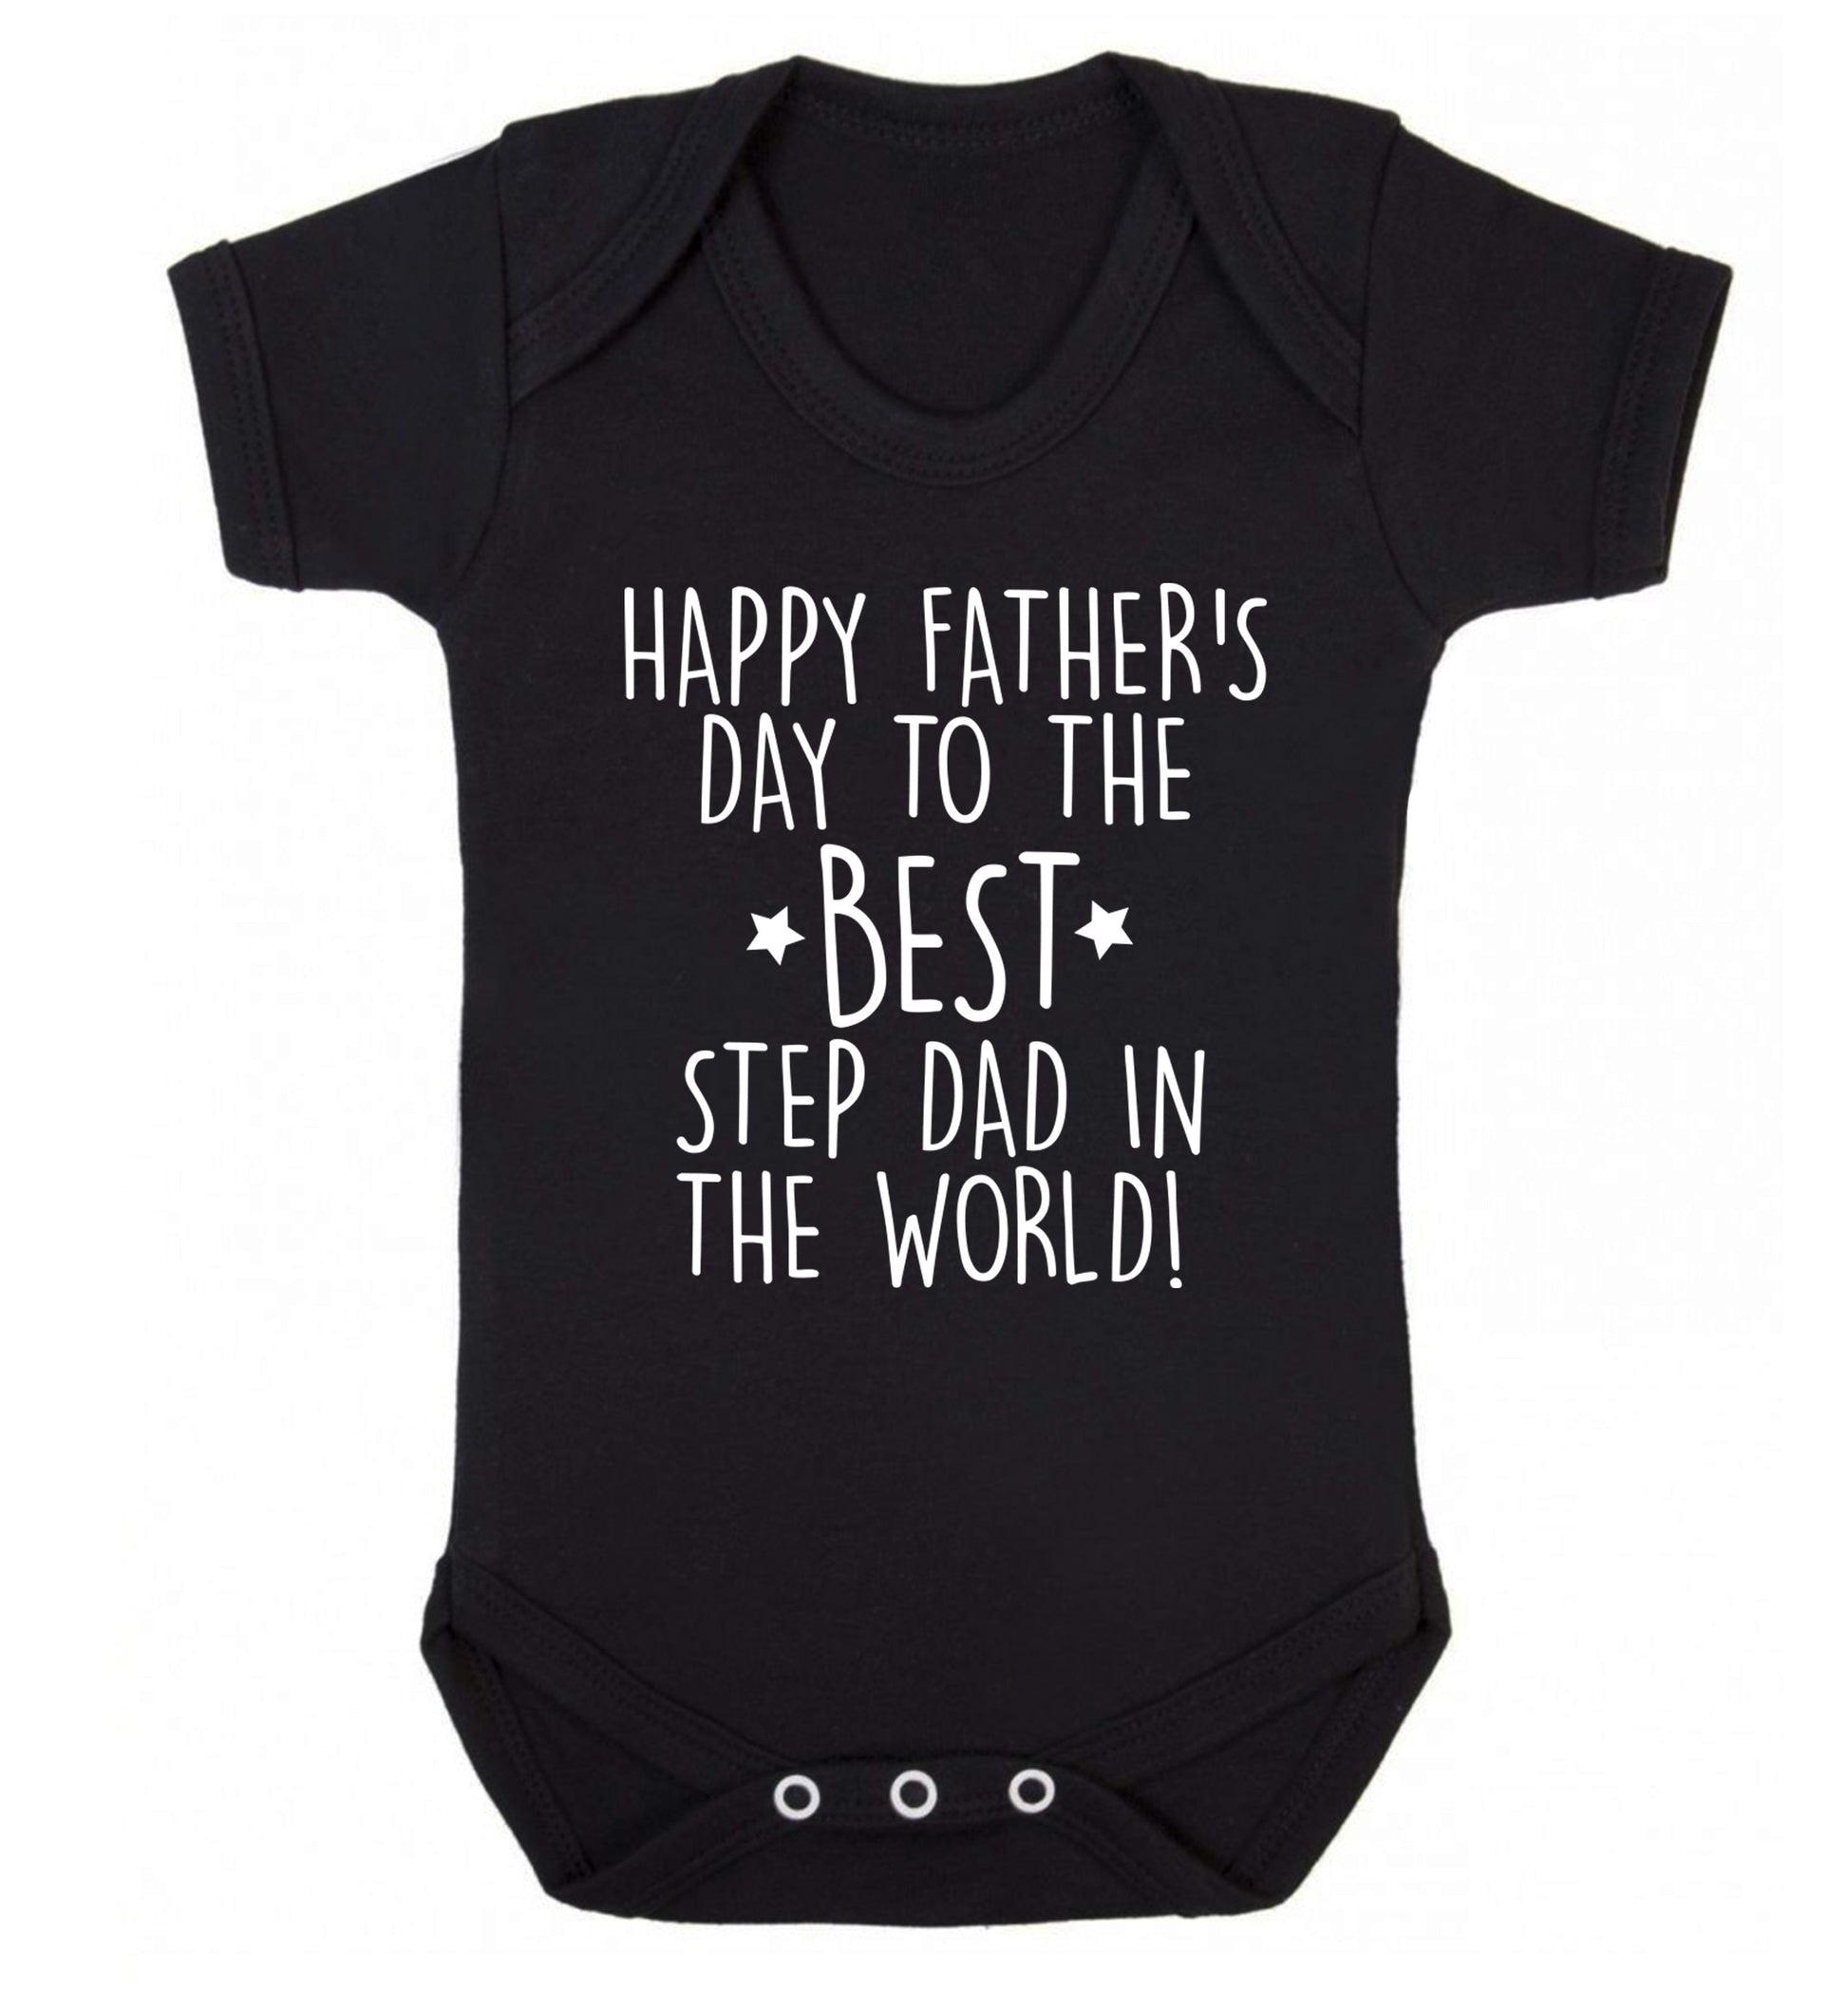 Happy Father's day to the best step dad in the world! Baby Vest black 18-24 months